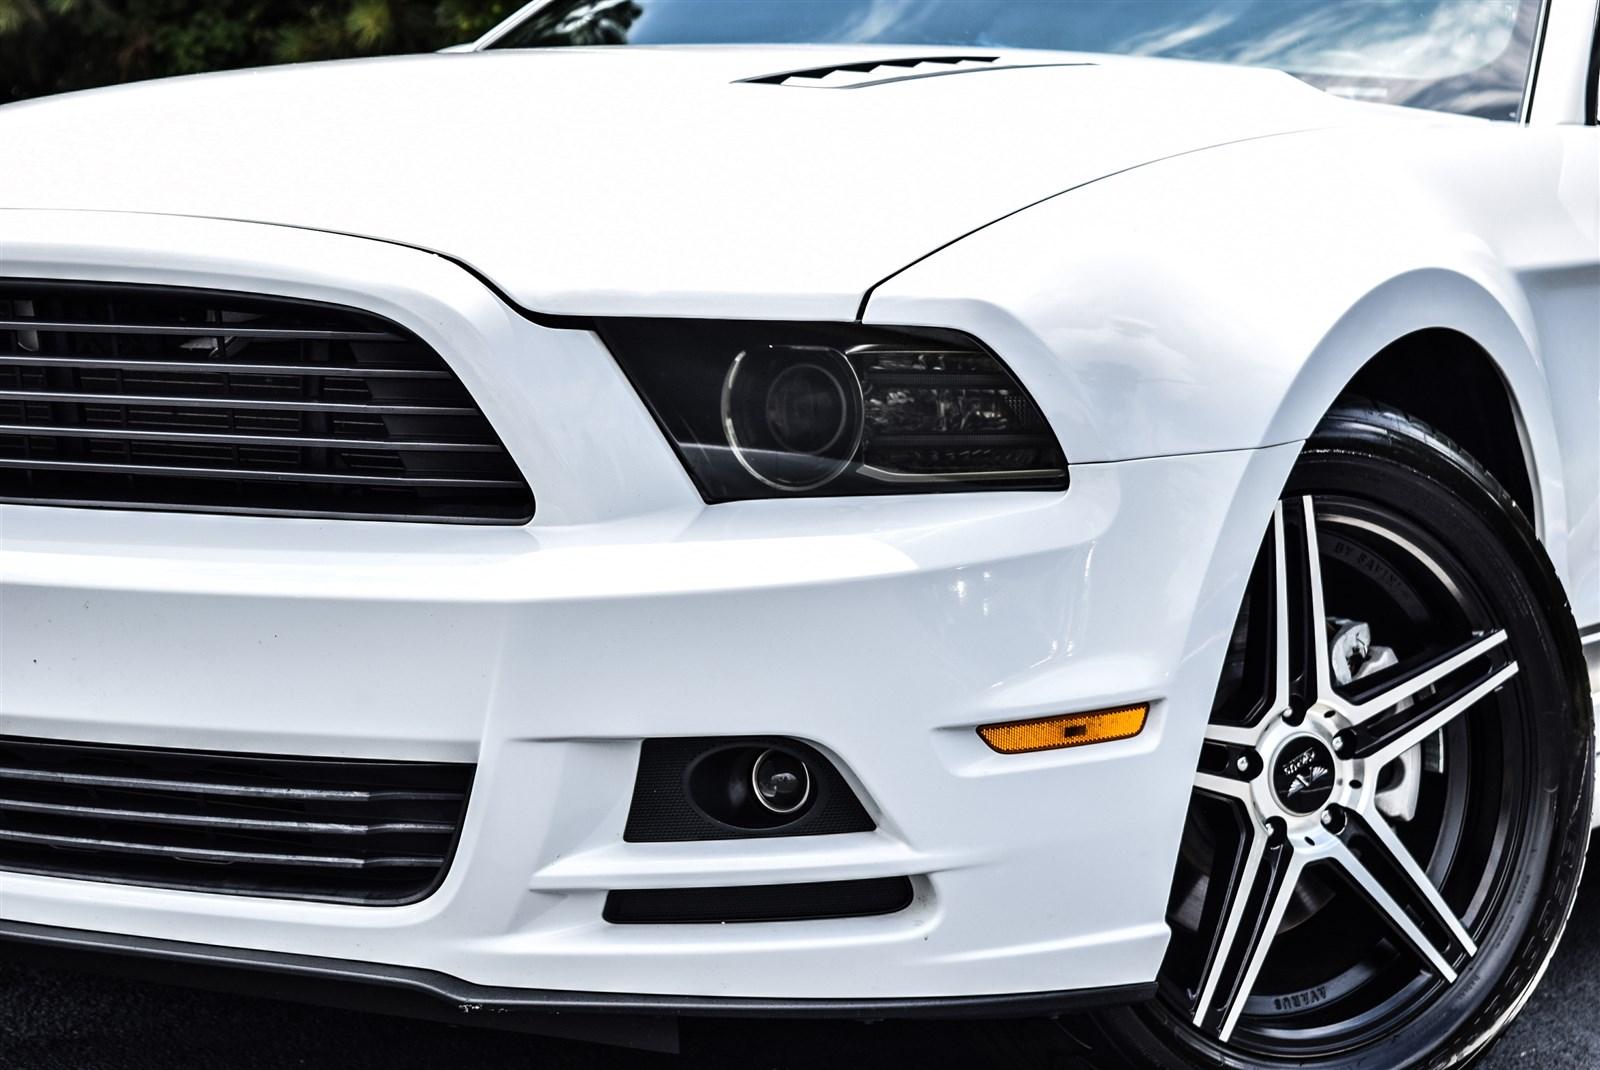 Used 2014 Ford Mustang V6 for sale Sold at Gravity Autos Marietta in Marietta GA 30060 3